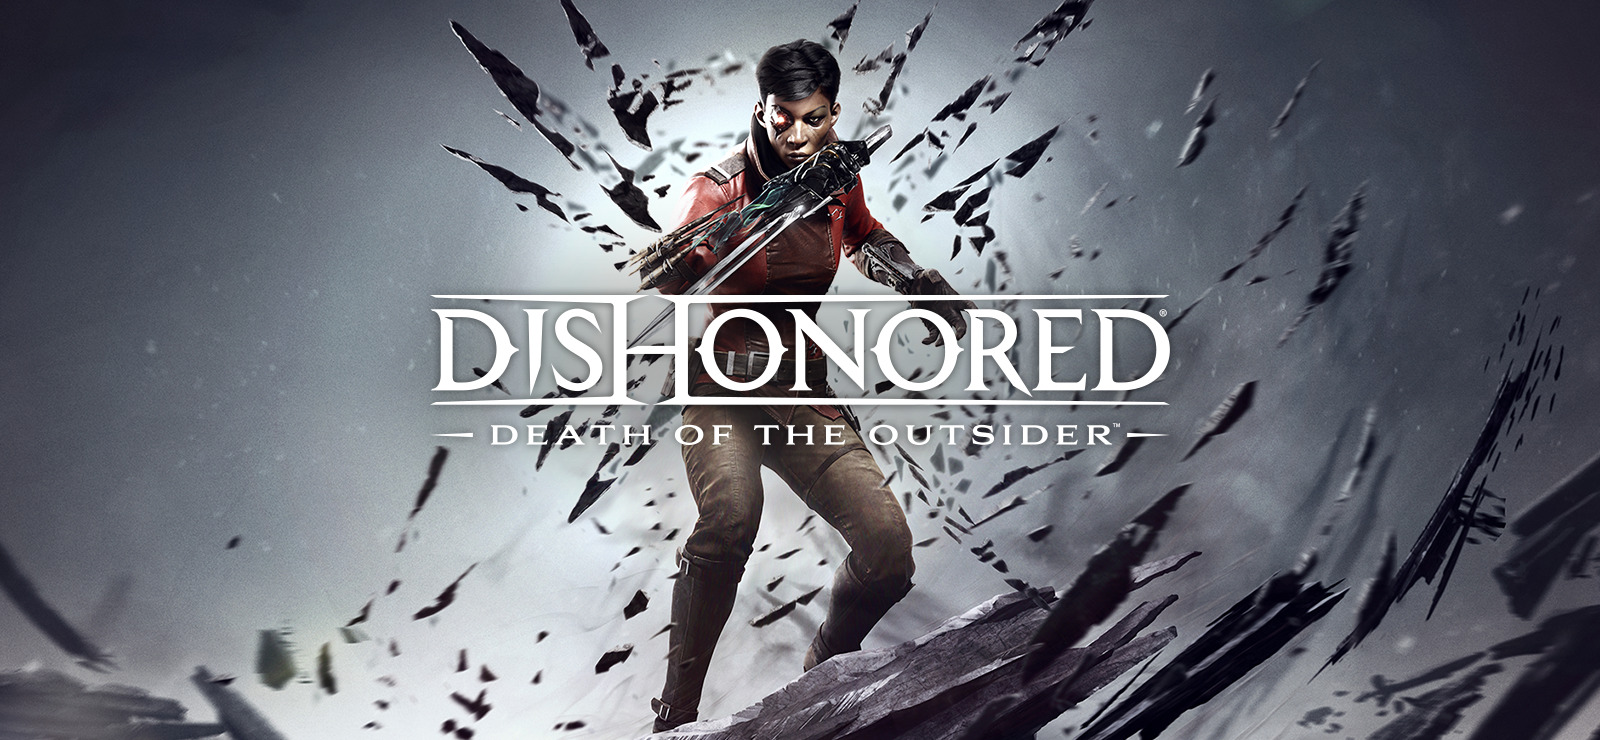 download dishonored death outsider for free